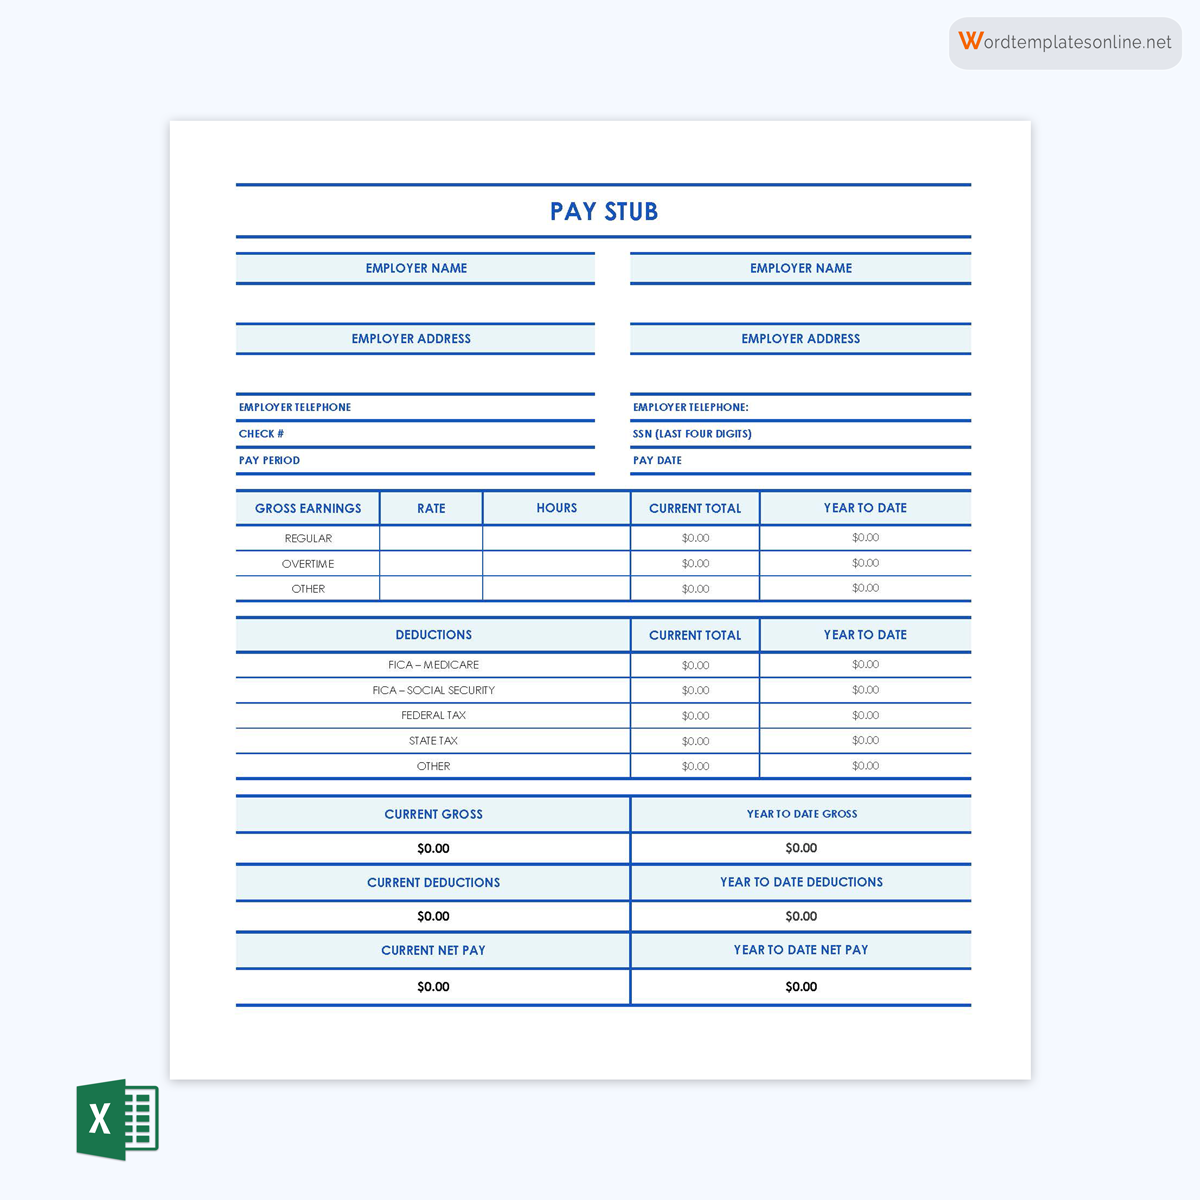 Free Customizable Pay Stub Template 04 as Excel Sheet